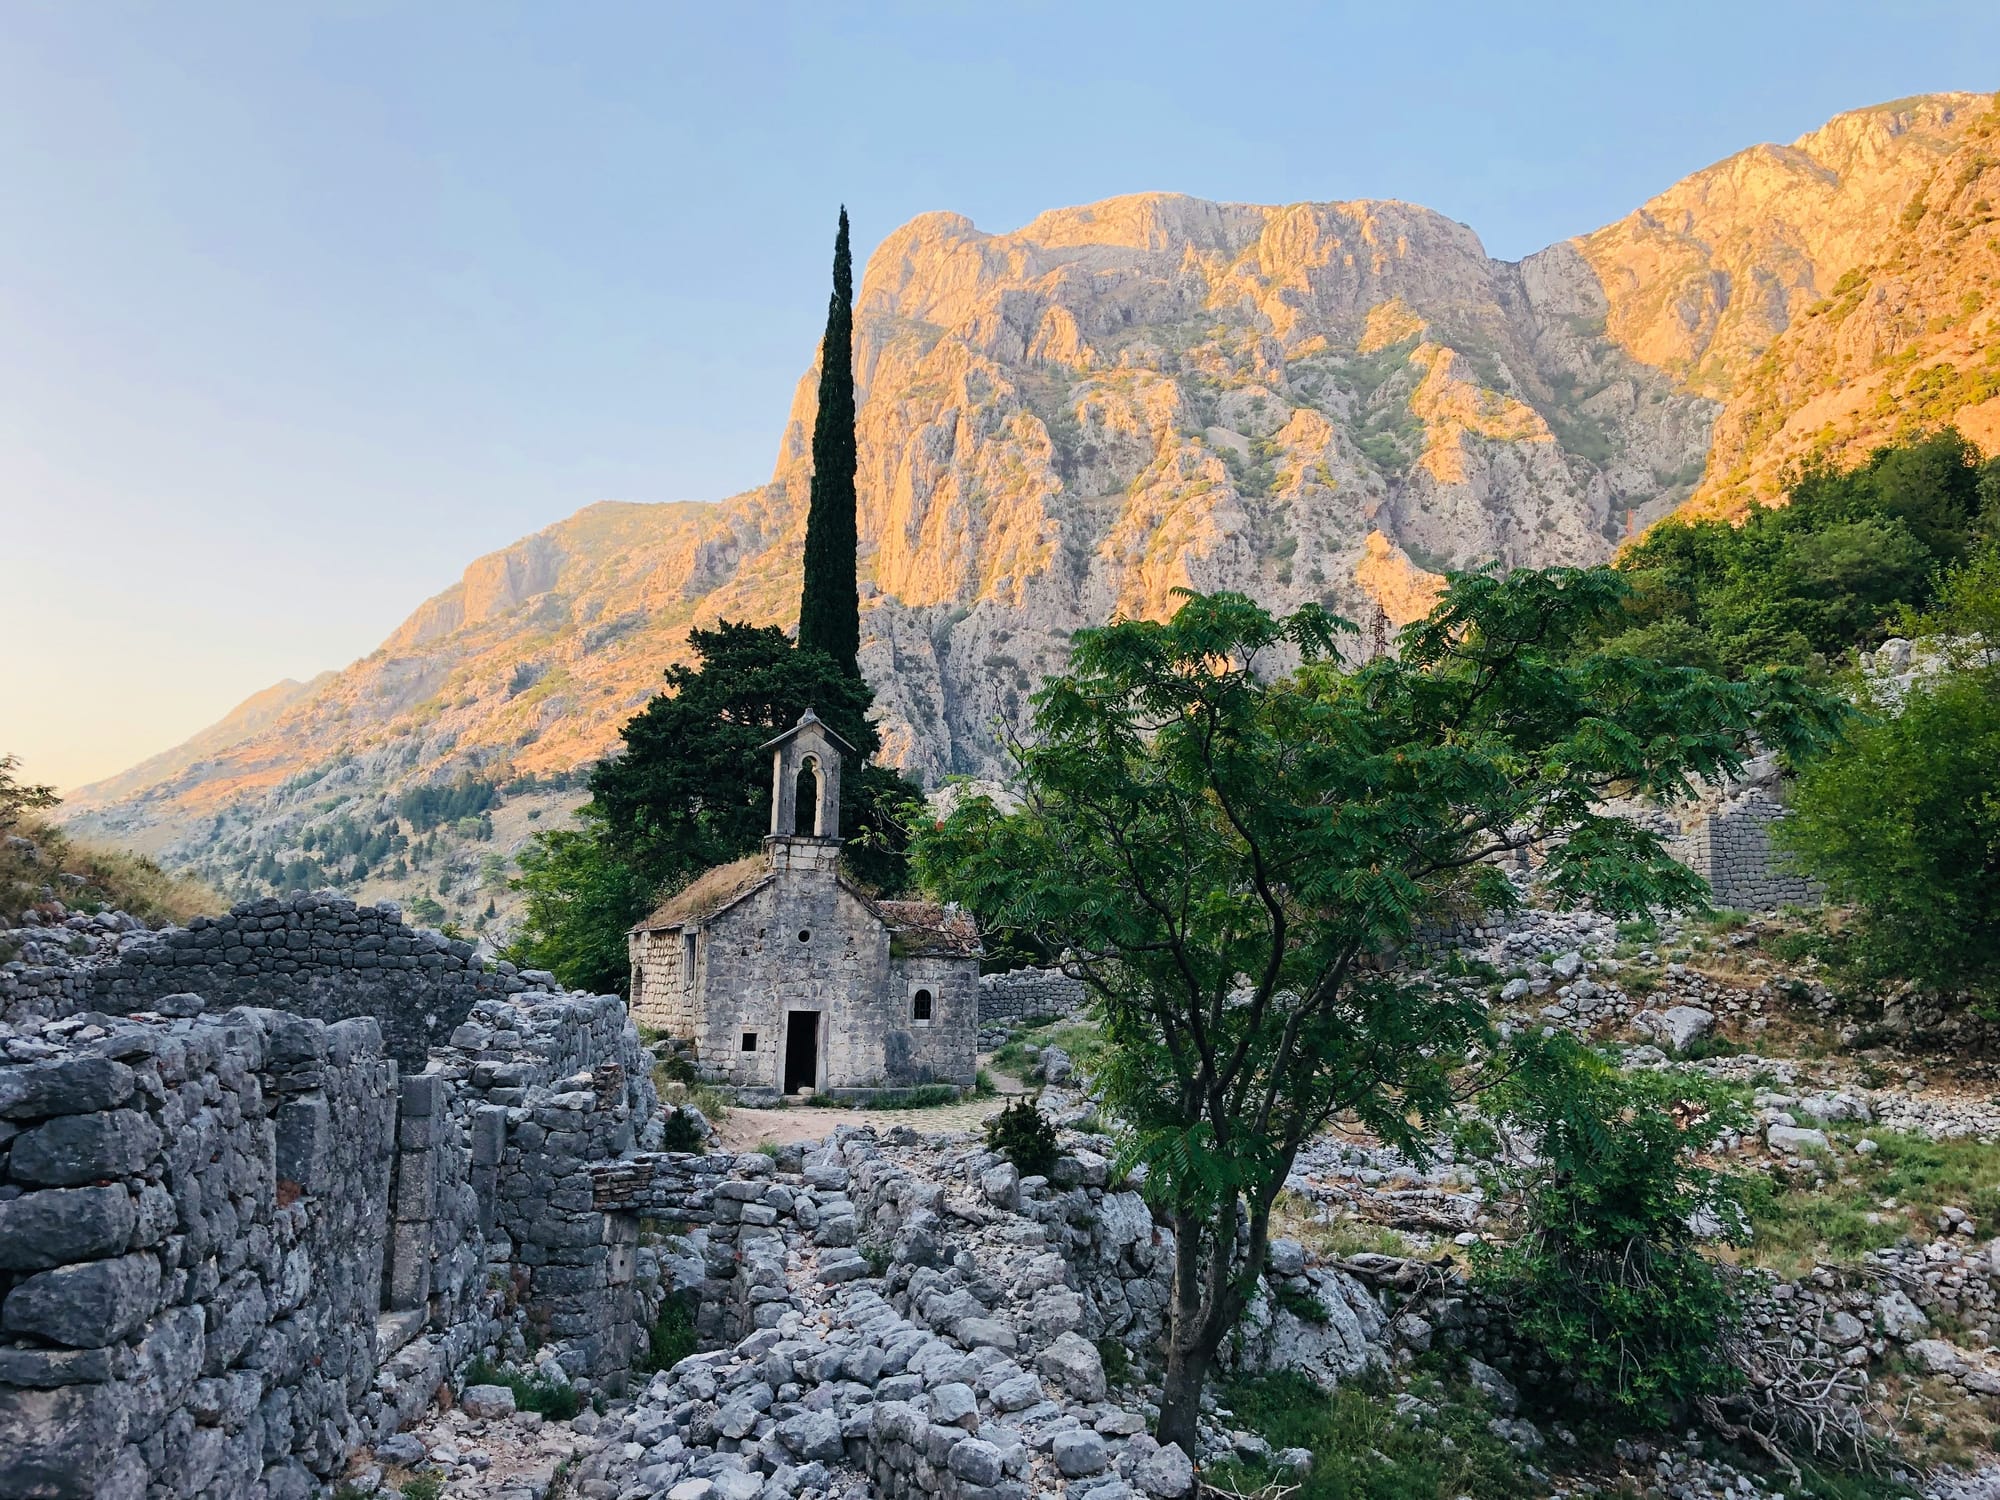 Ruins of a church in Kotor, Montenegro